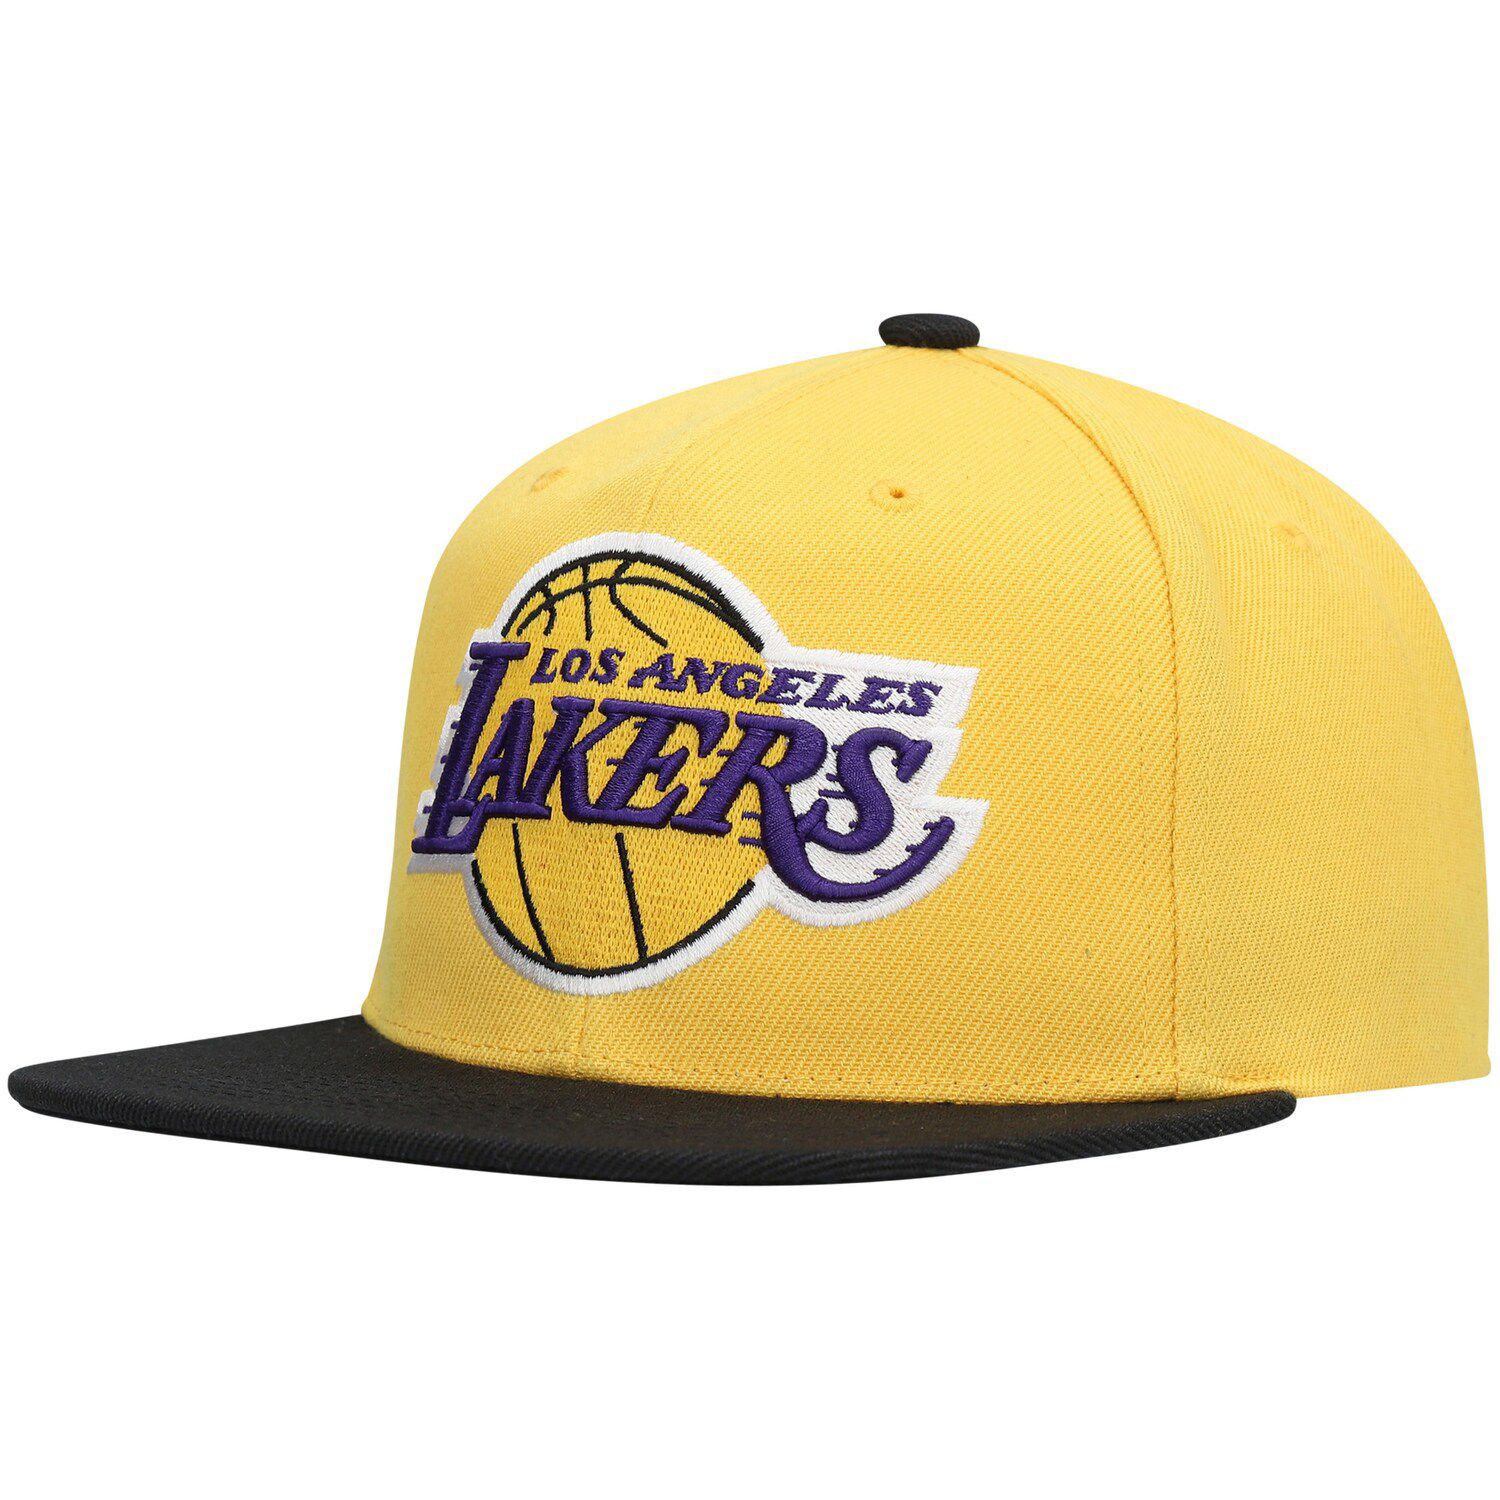 47 Los Angeles Lakers Gold MVP Adjustable Hat, Youth One Size Fits All,  Yellow